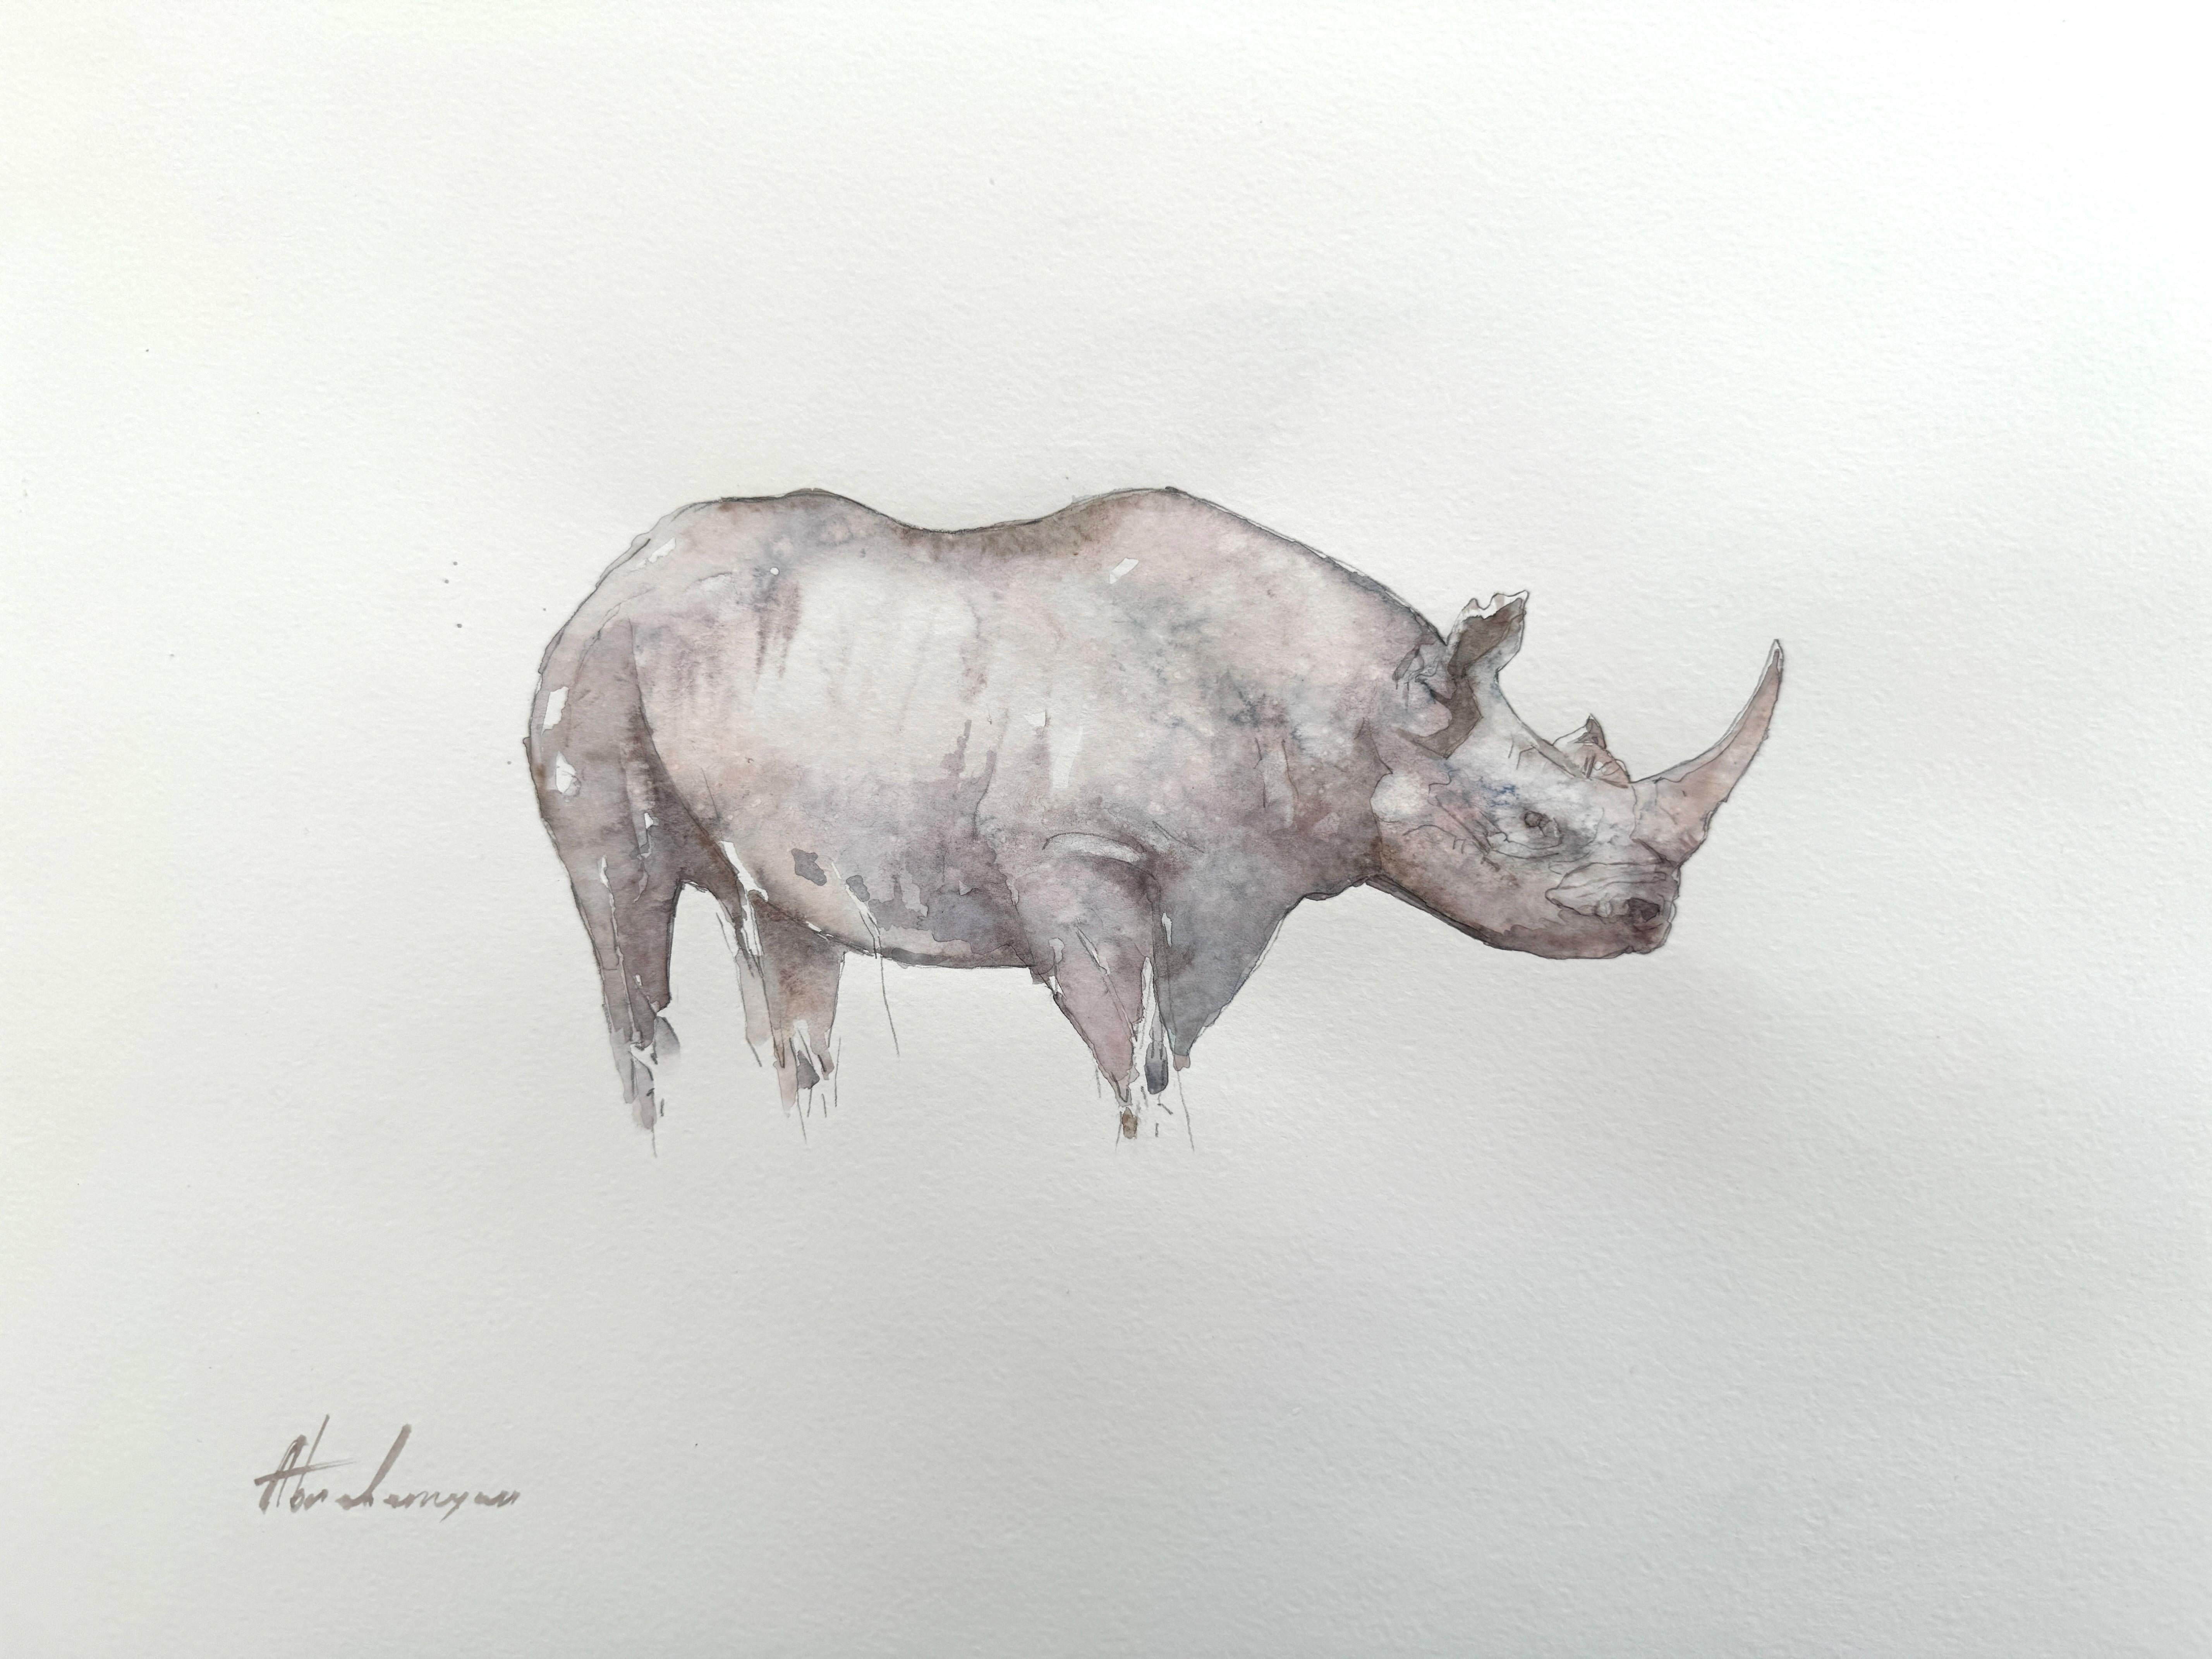 Rhinoceros, Wild animal, watercolor on Paper, Handmade Painting, One of a Kind